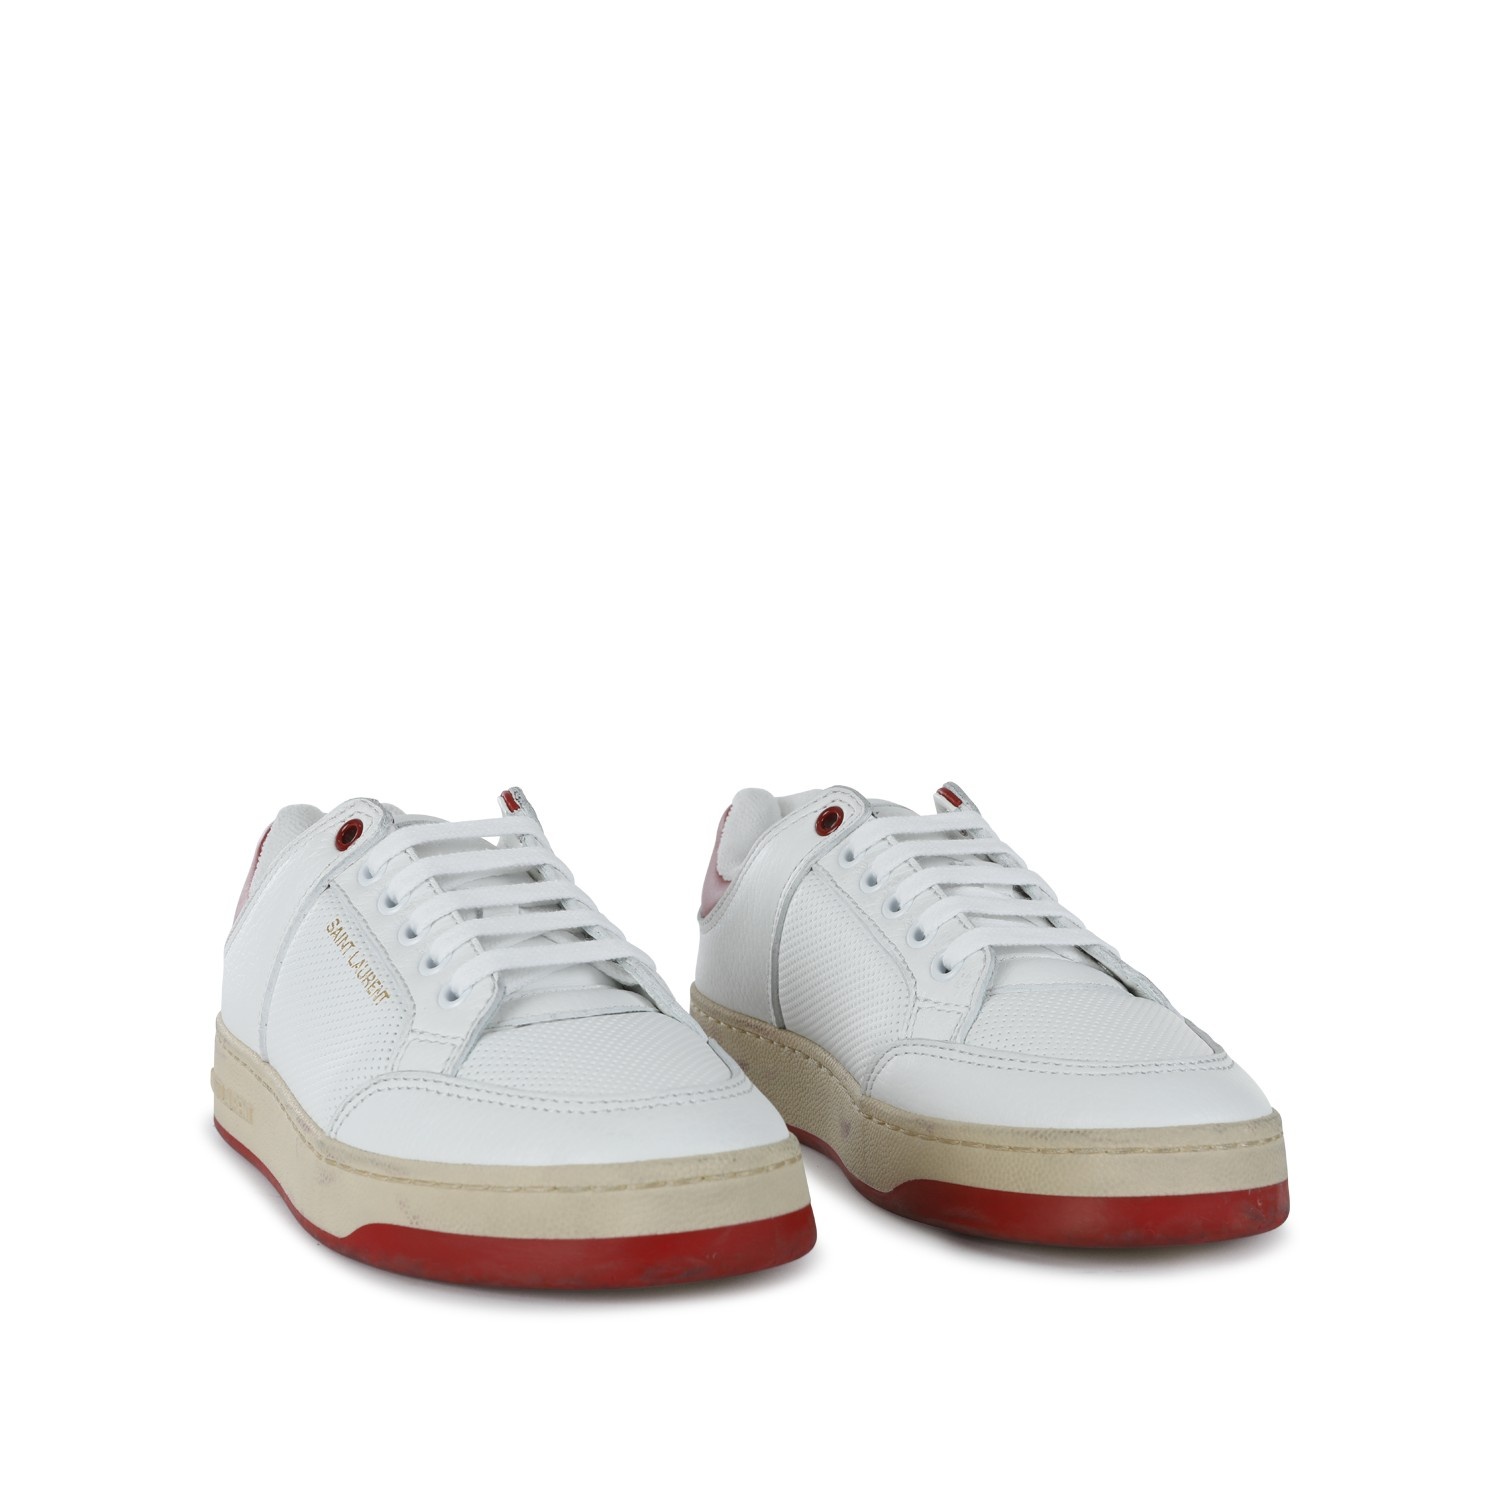 WHITE AND RED LEATHER SL/61 SNEAKERS - 2